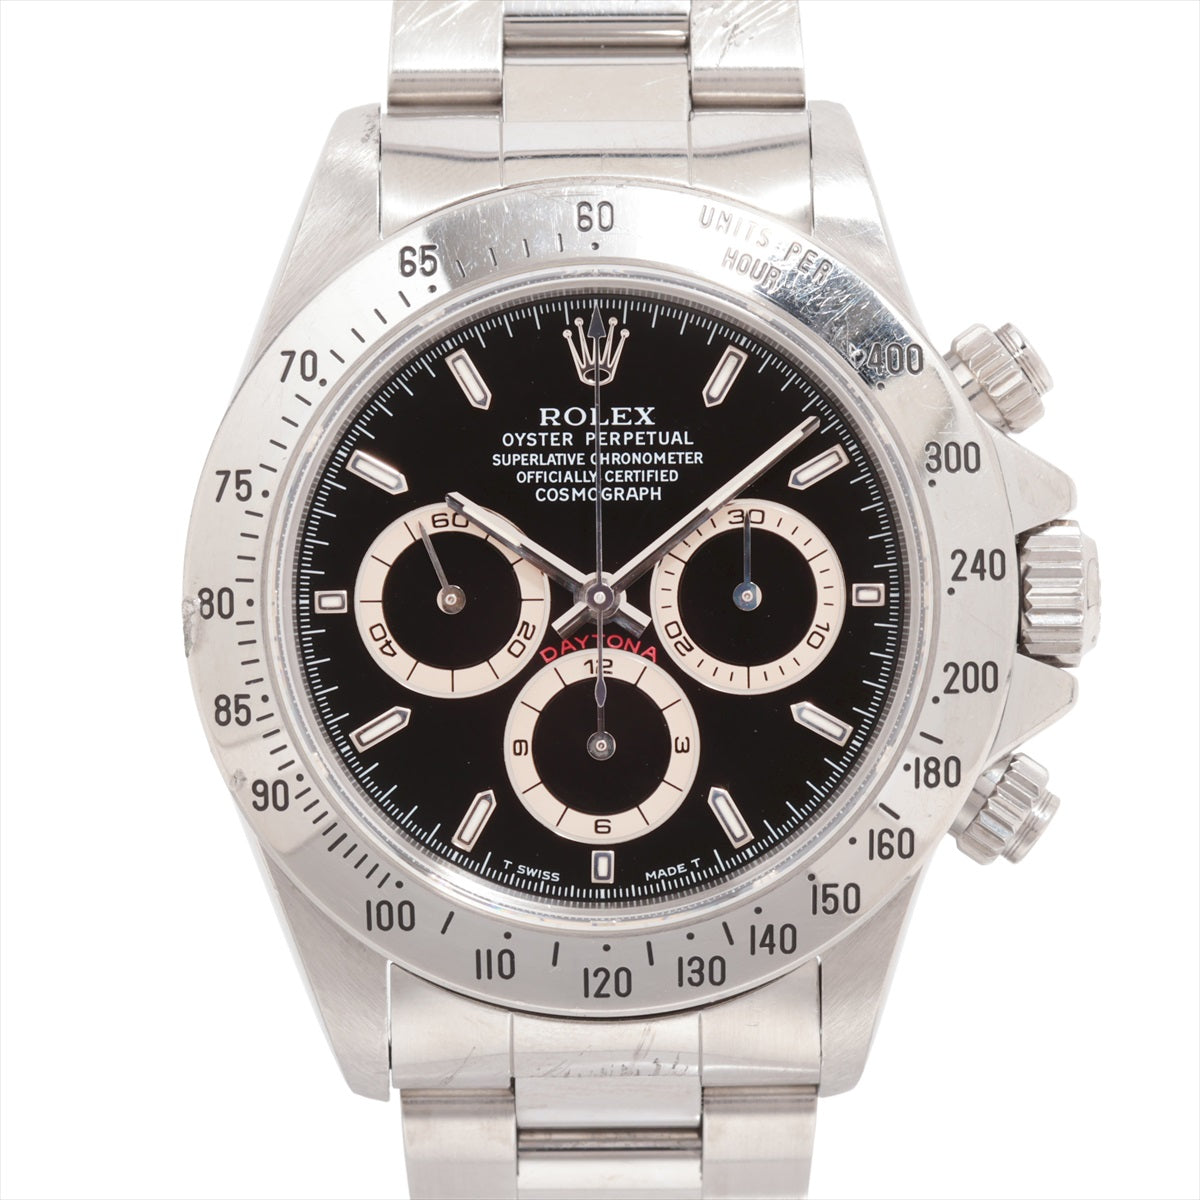 Rolex Cosmograph Daytona 16520 SS AT Black Dial Chipped bezel 12:00 side pusher replaced